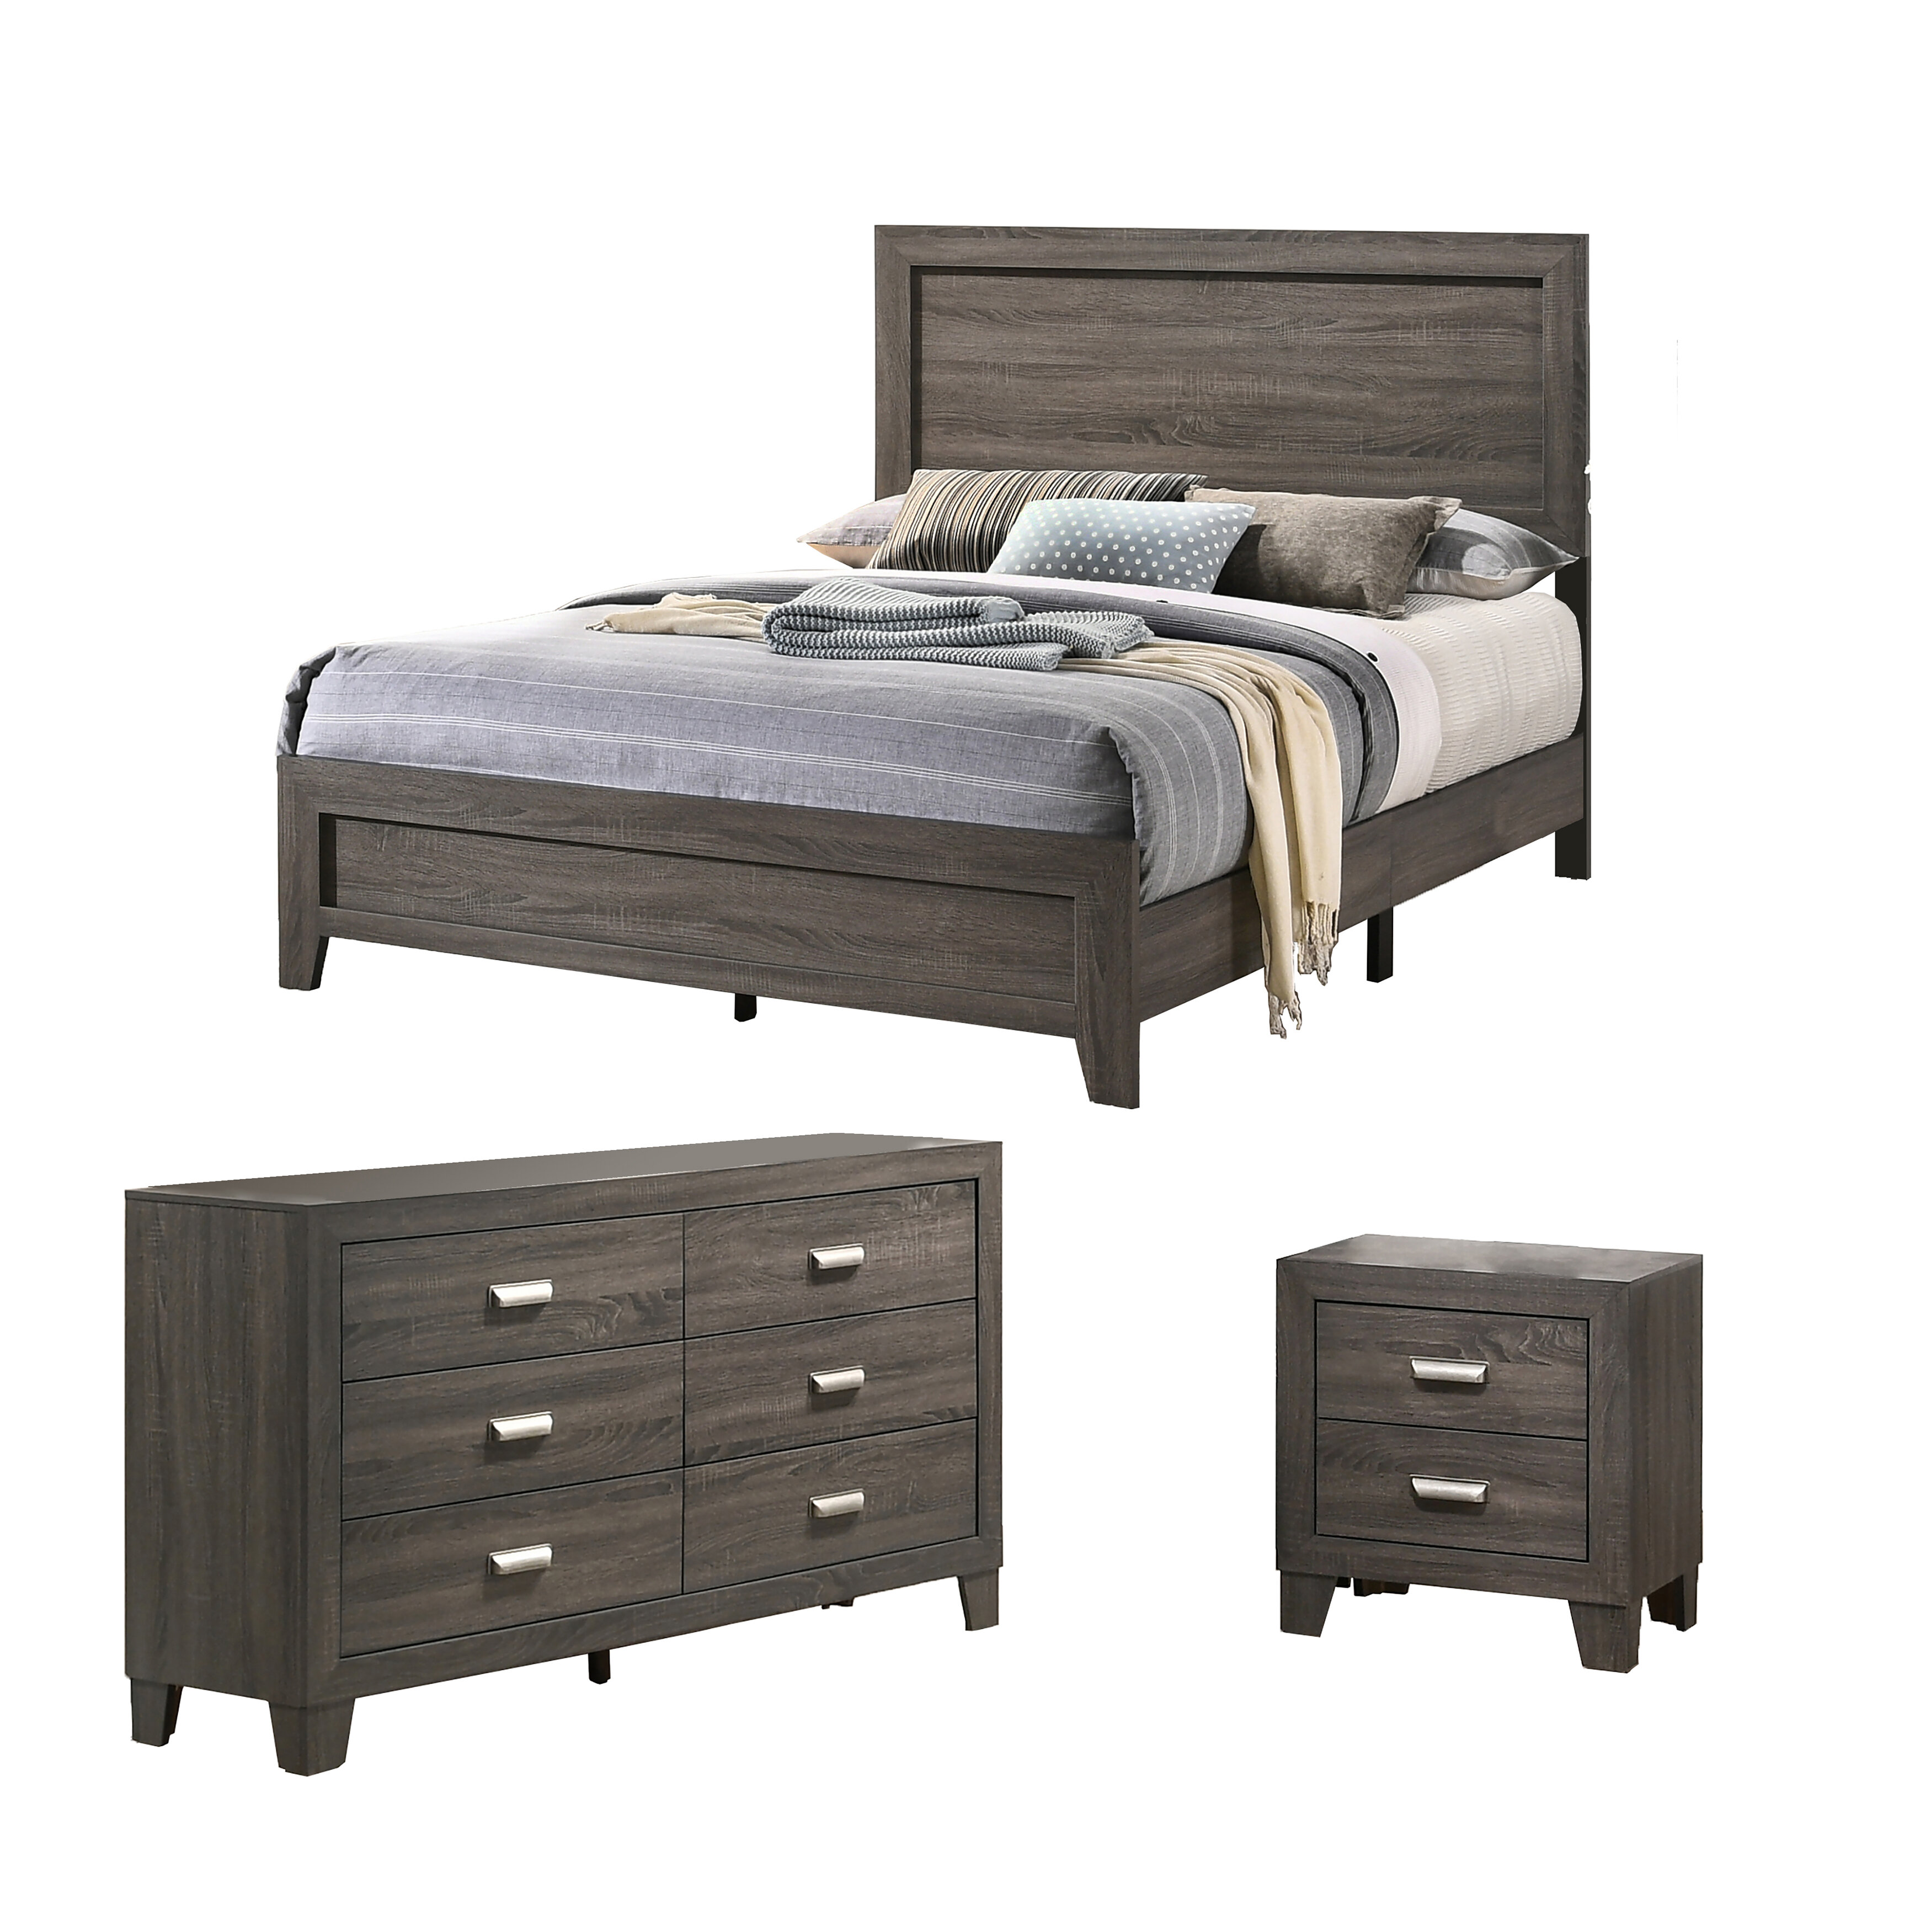 Rustic Bedroom Furniture Sets Free Shipping Over 35 Wayfair